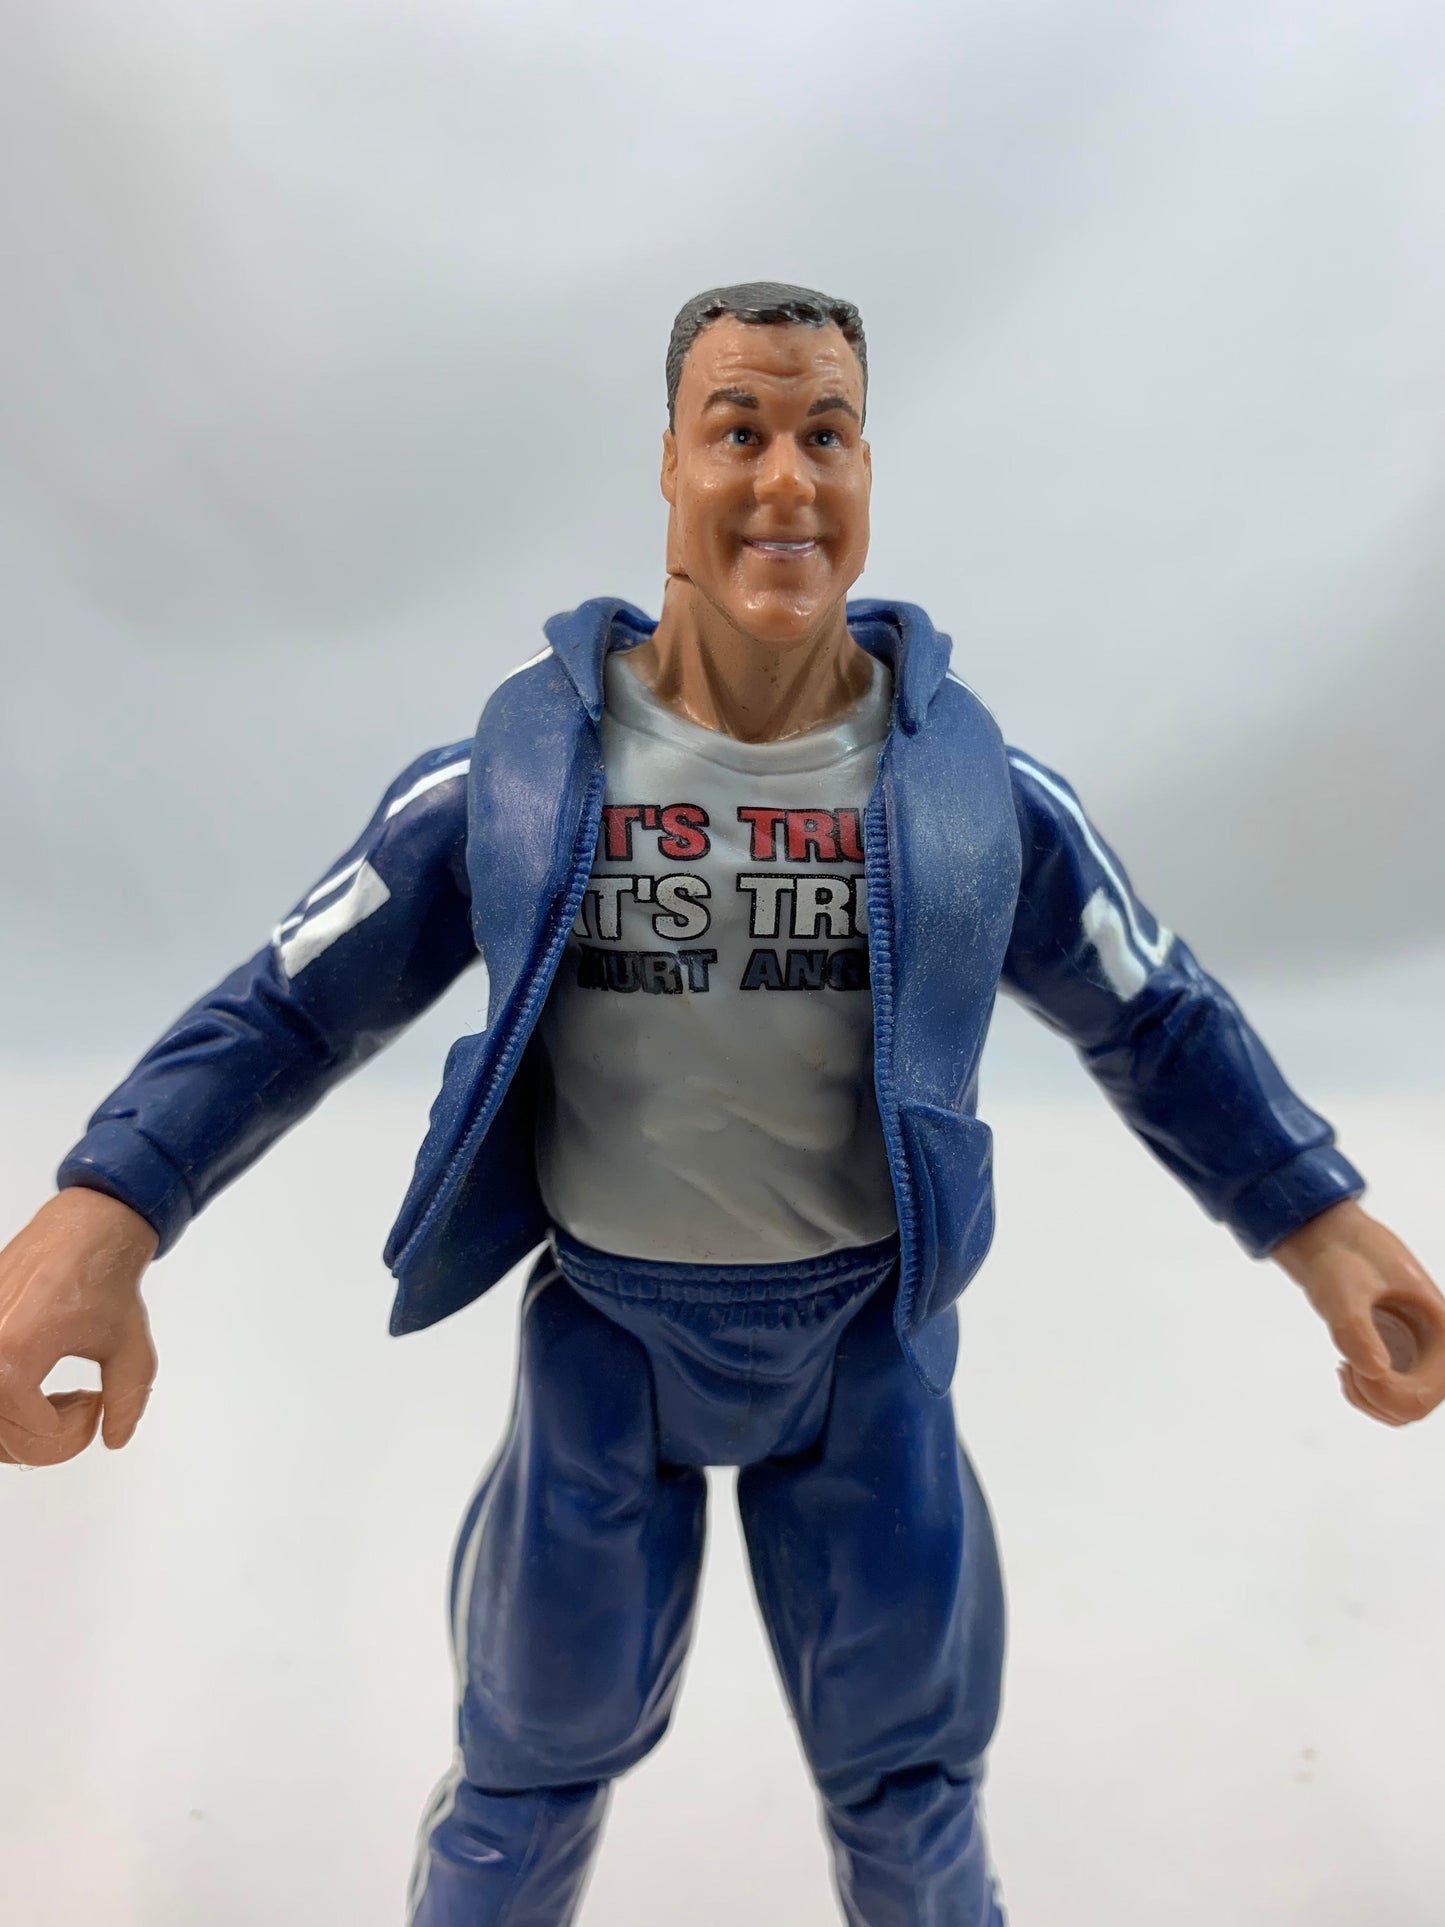 Jakks Pacific TNA Kurt Angle 2000 Series with tracksuit and medals - Loose